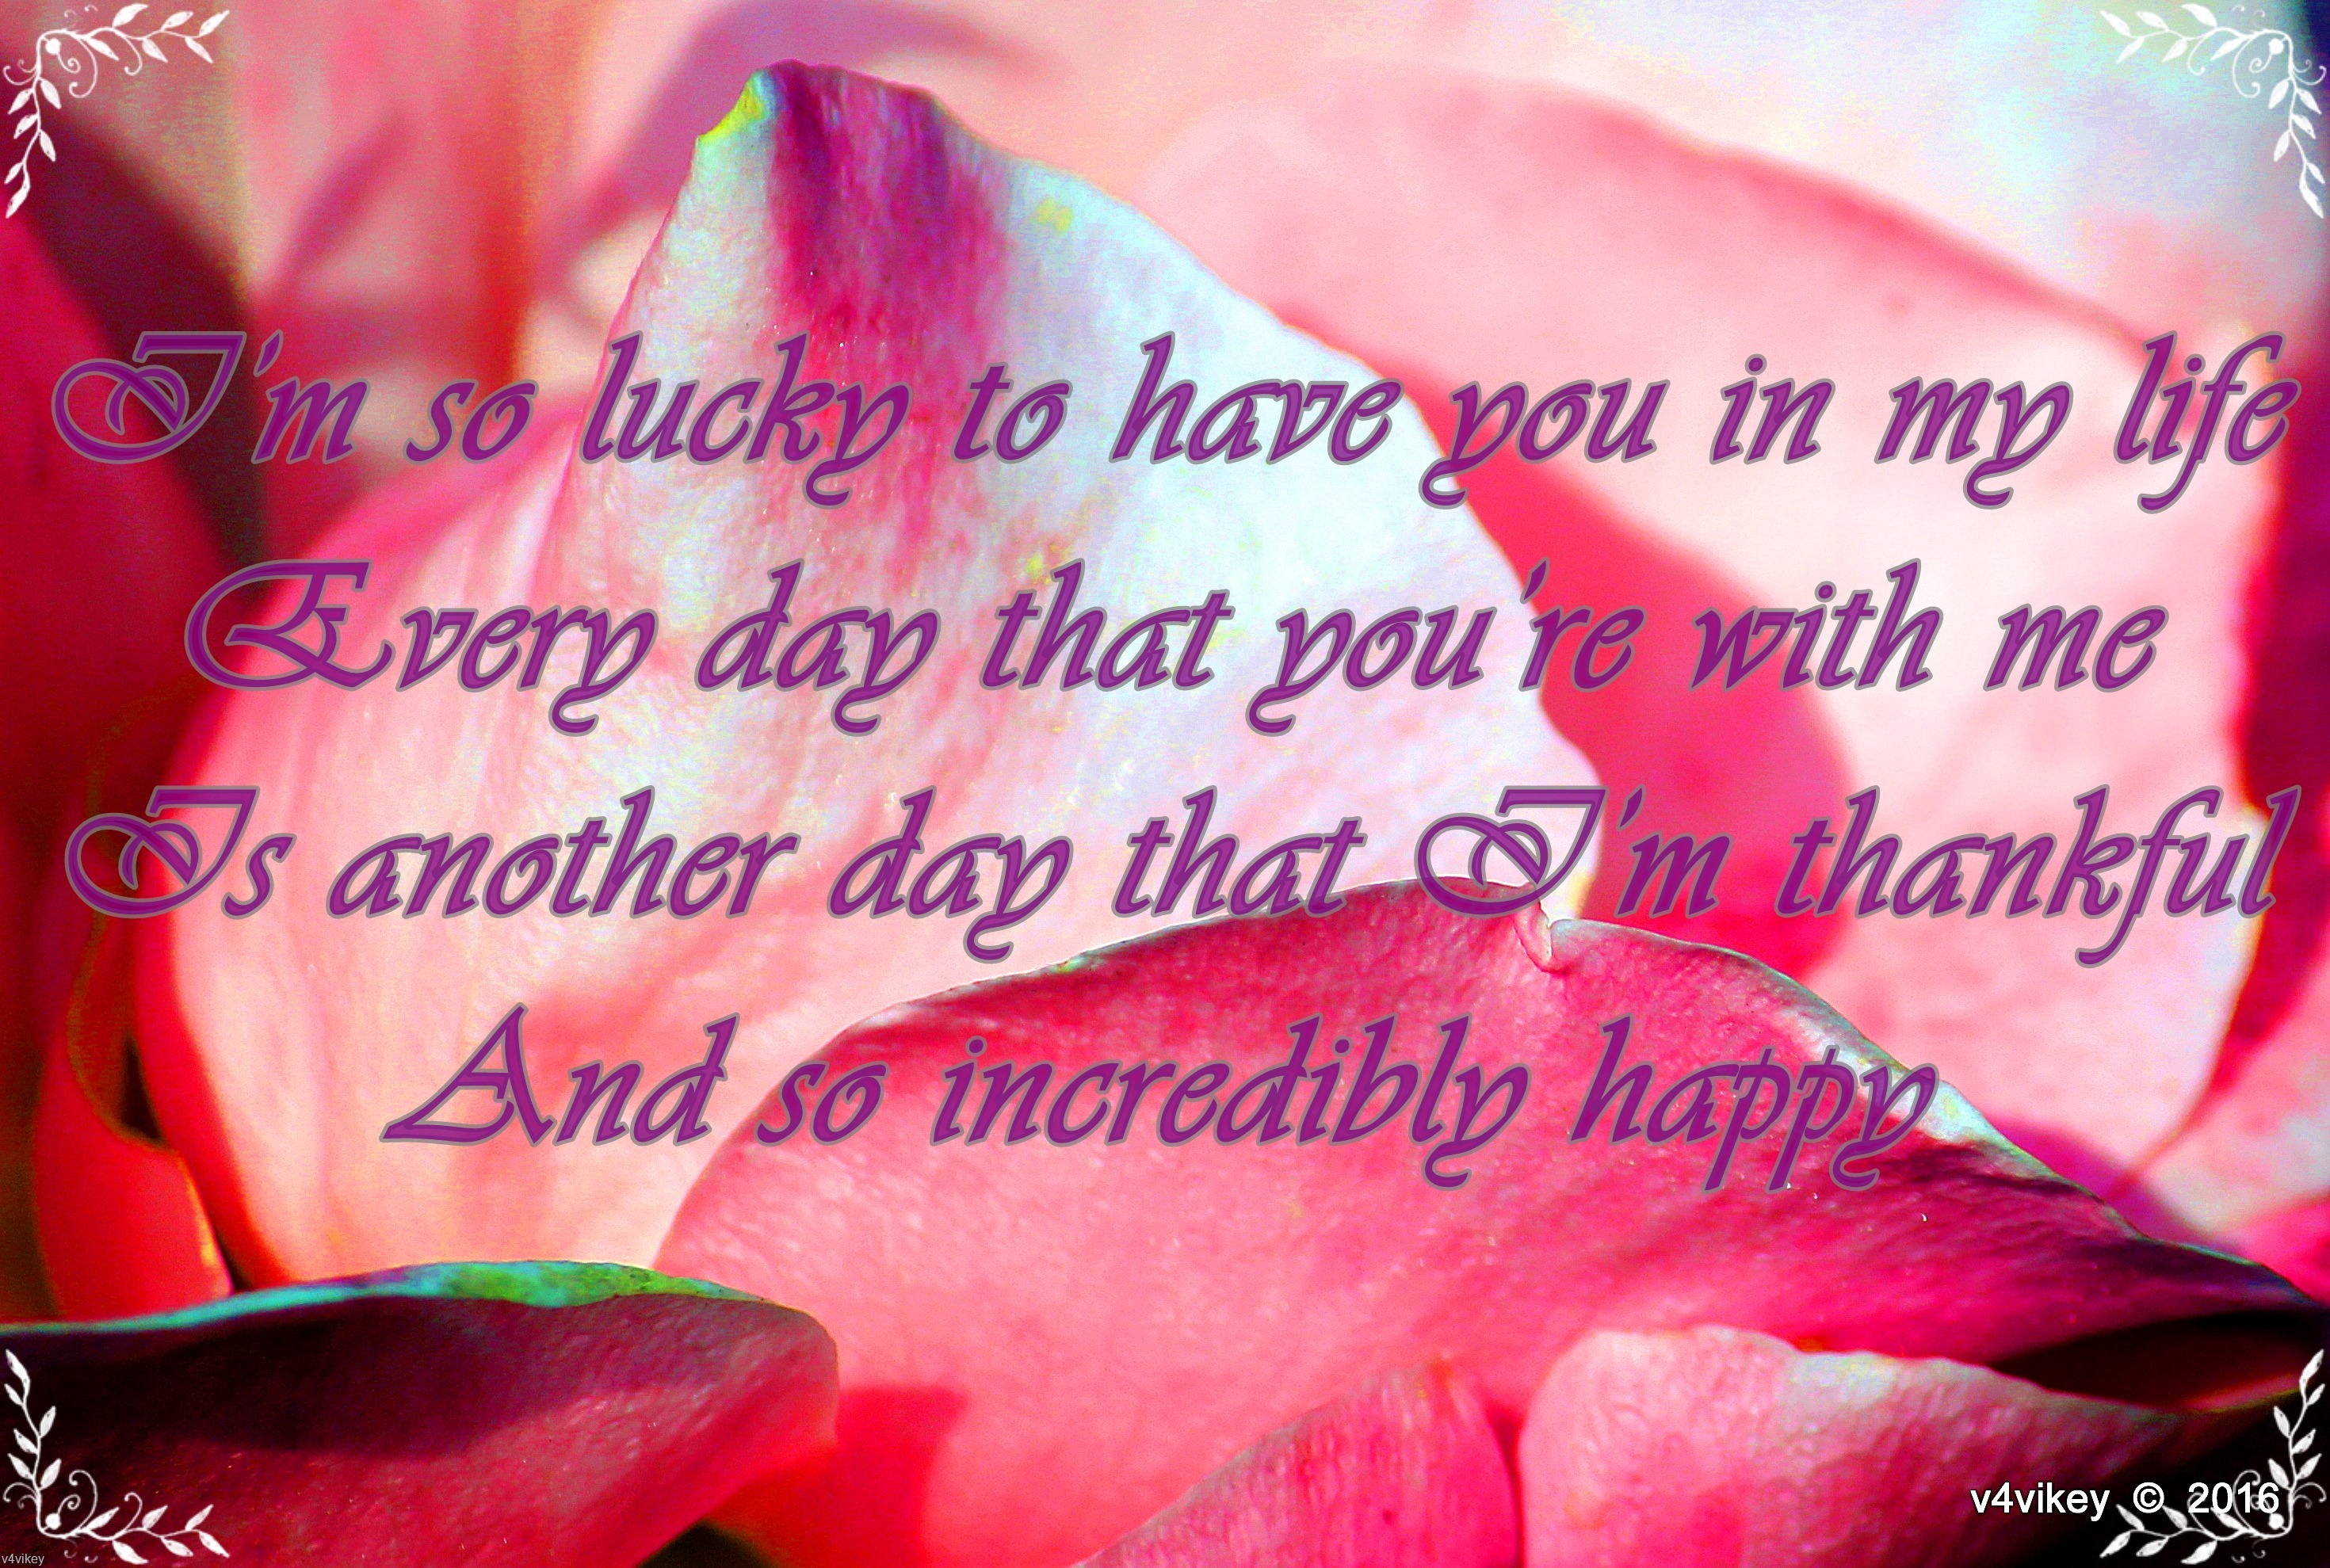 Im So Lucky To Have You In My Life - HD Wallpaper 